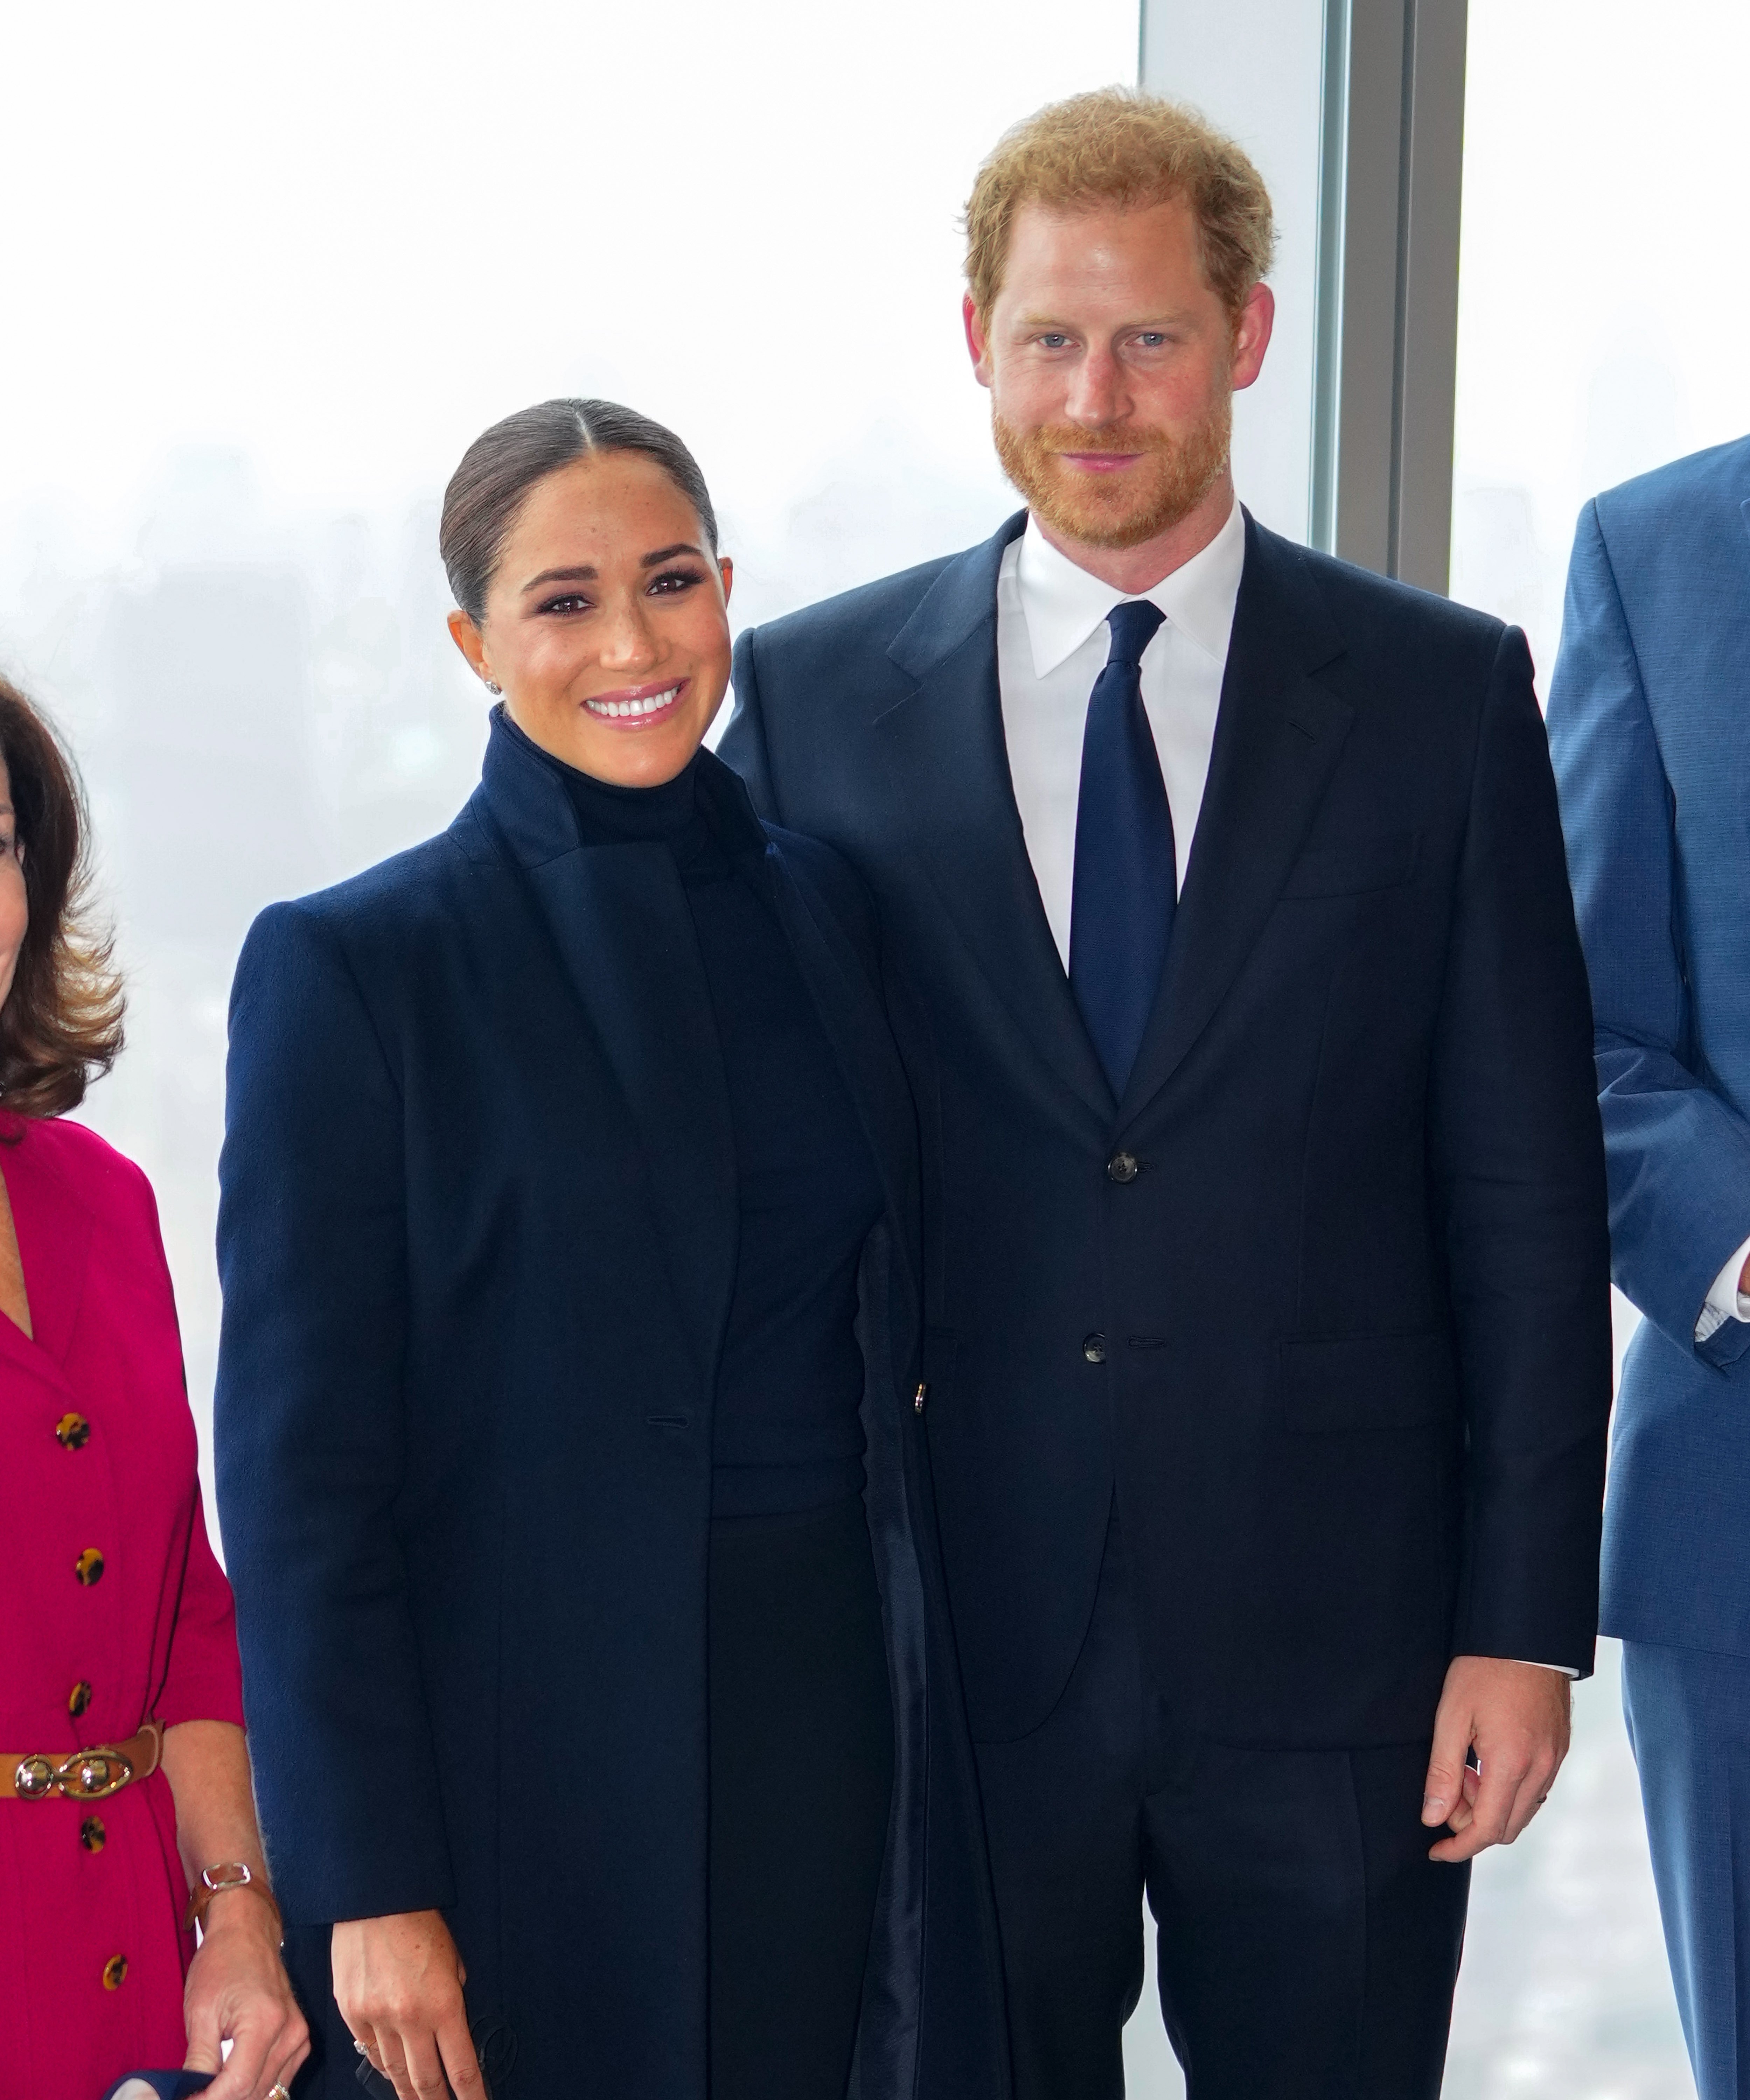 Prince Harry and Meghan Markle, Duke and Duchess of Sussex visit 1 World Trade Center on September 23, 2021 in New York City. | Source: Getty Images